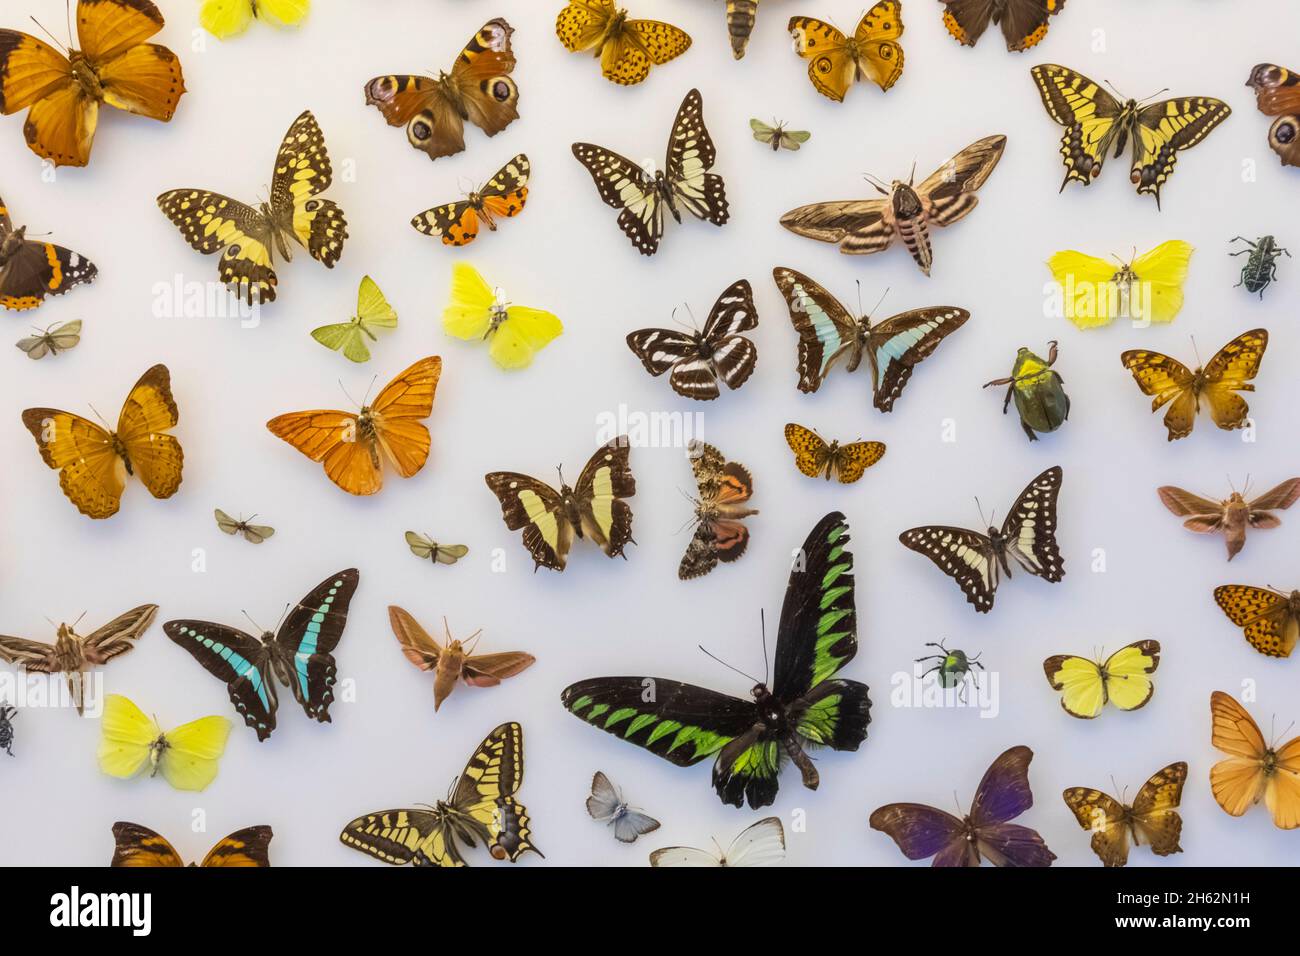 england,hampshire,portsmouth,southsea,cumberland house natural history museum,colourful display of butterflies Stock Photo